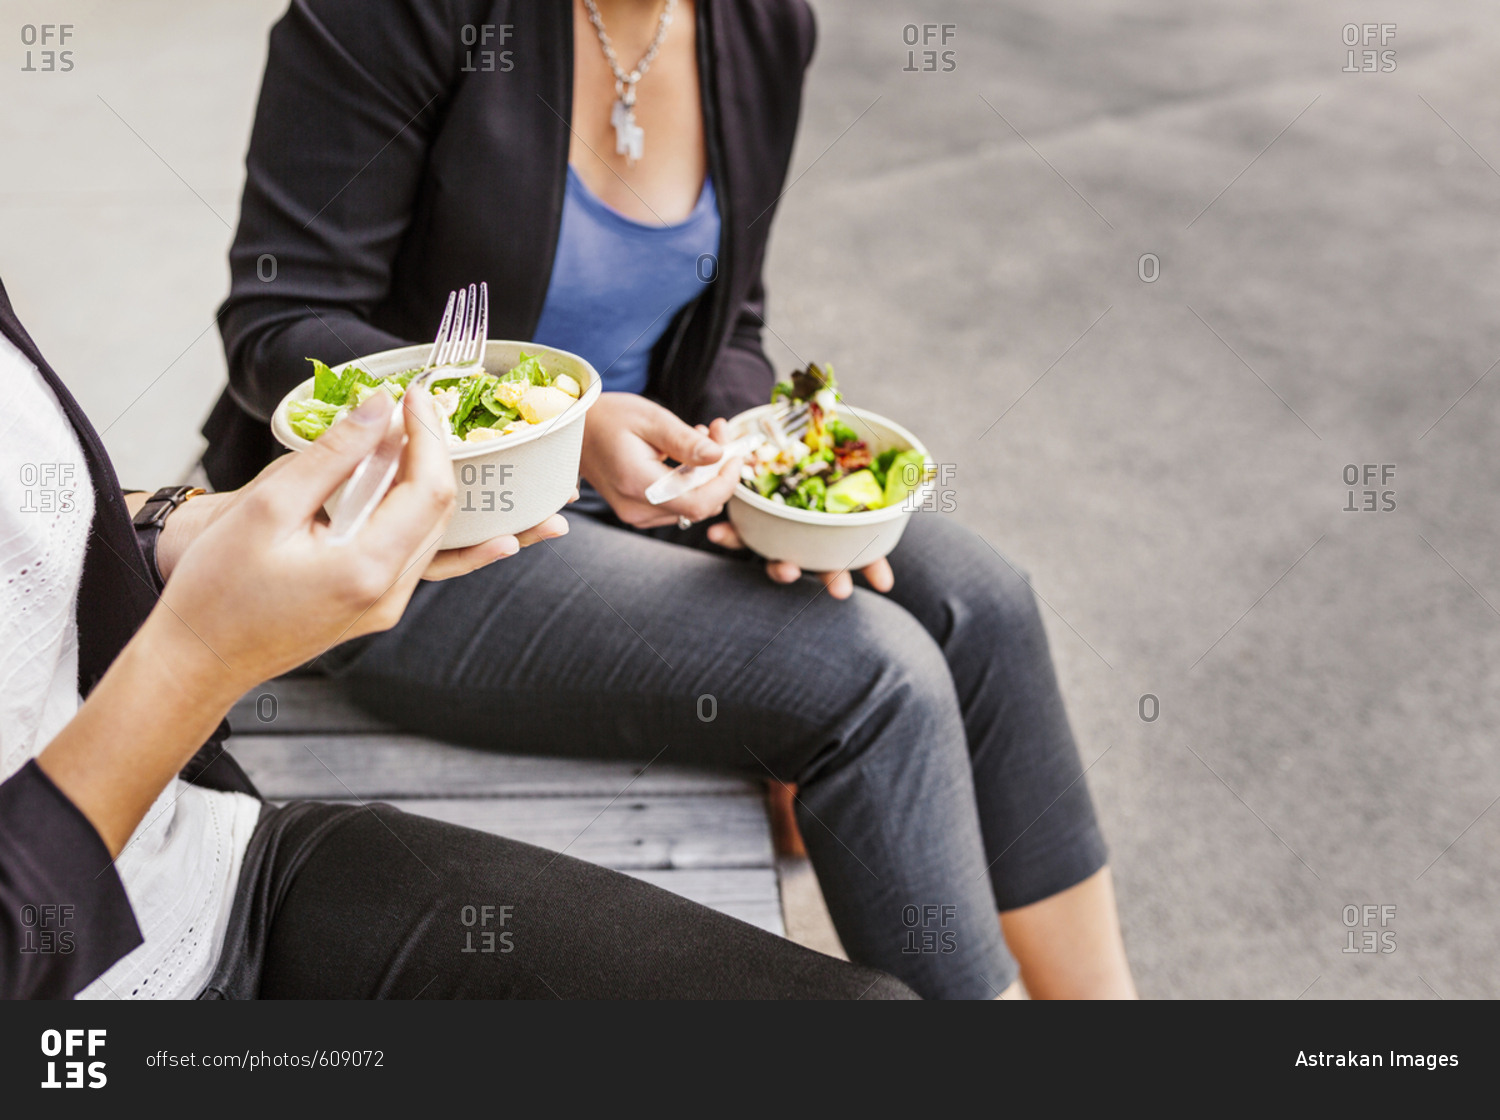 Mid section of two women eating salad